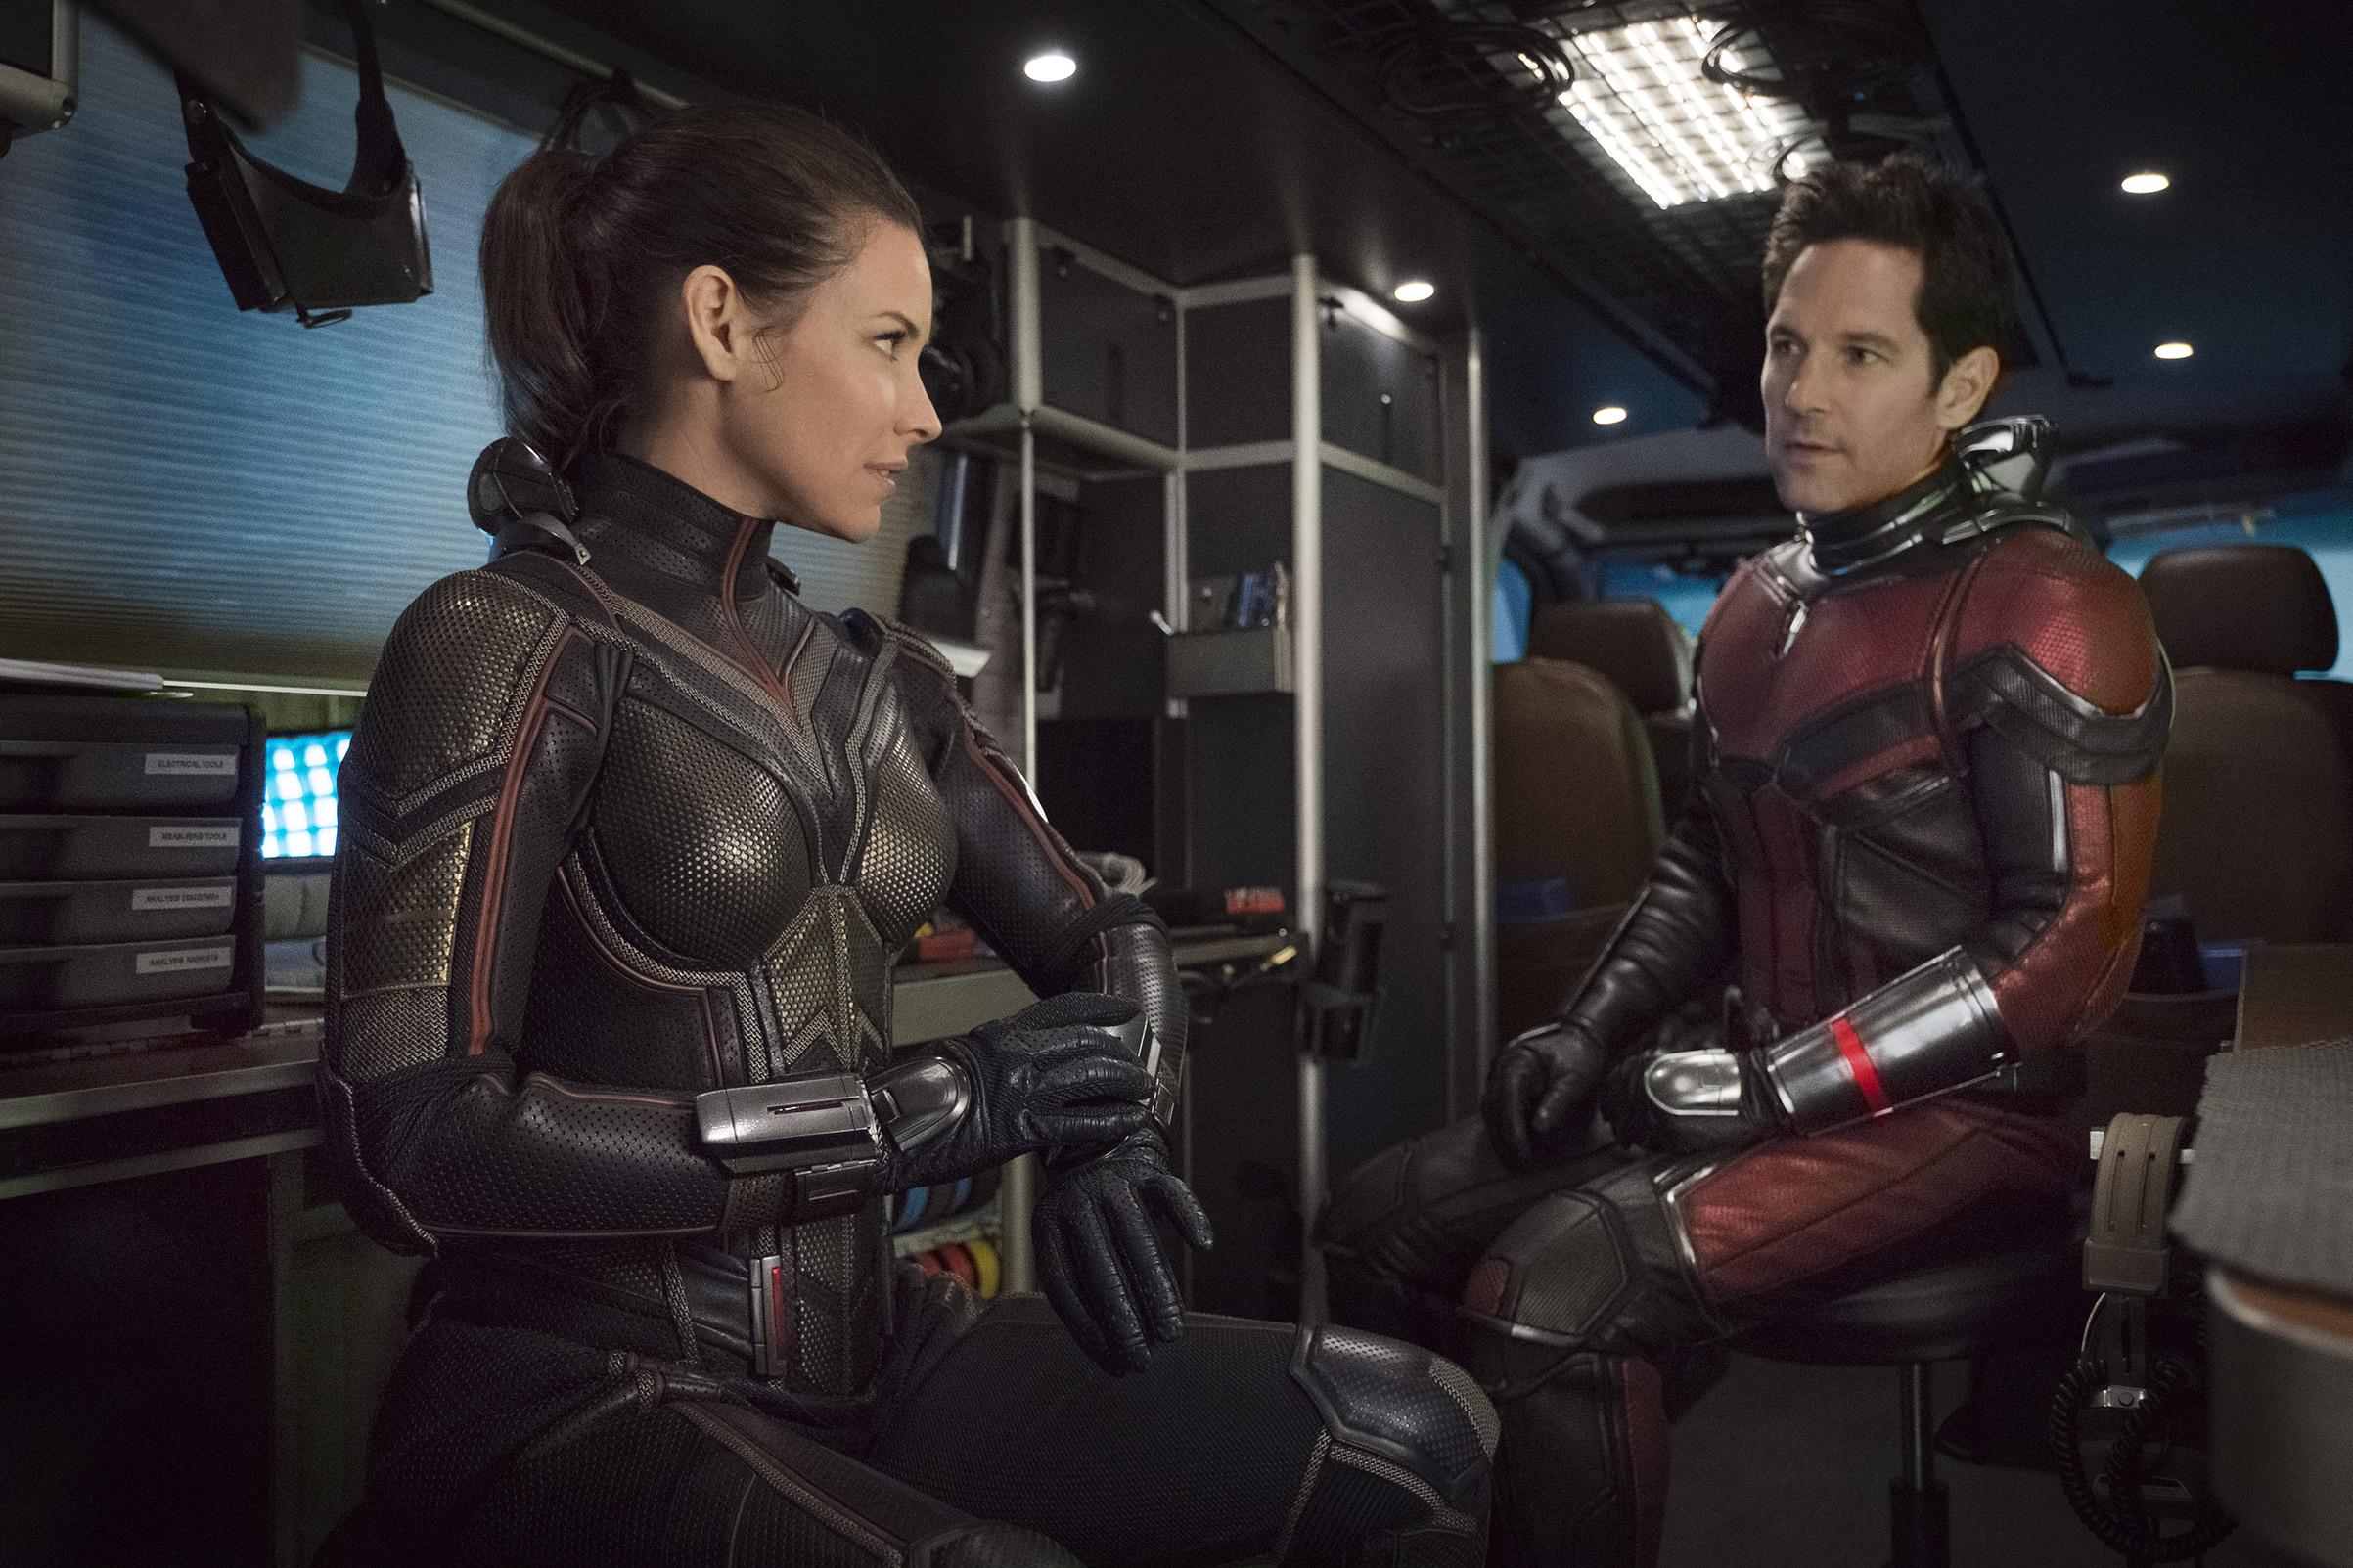 Evangeline Lilly and Paul Rudd in ‘Ant-Man and the Wasp’